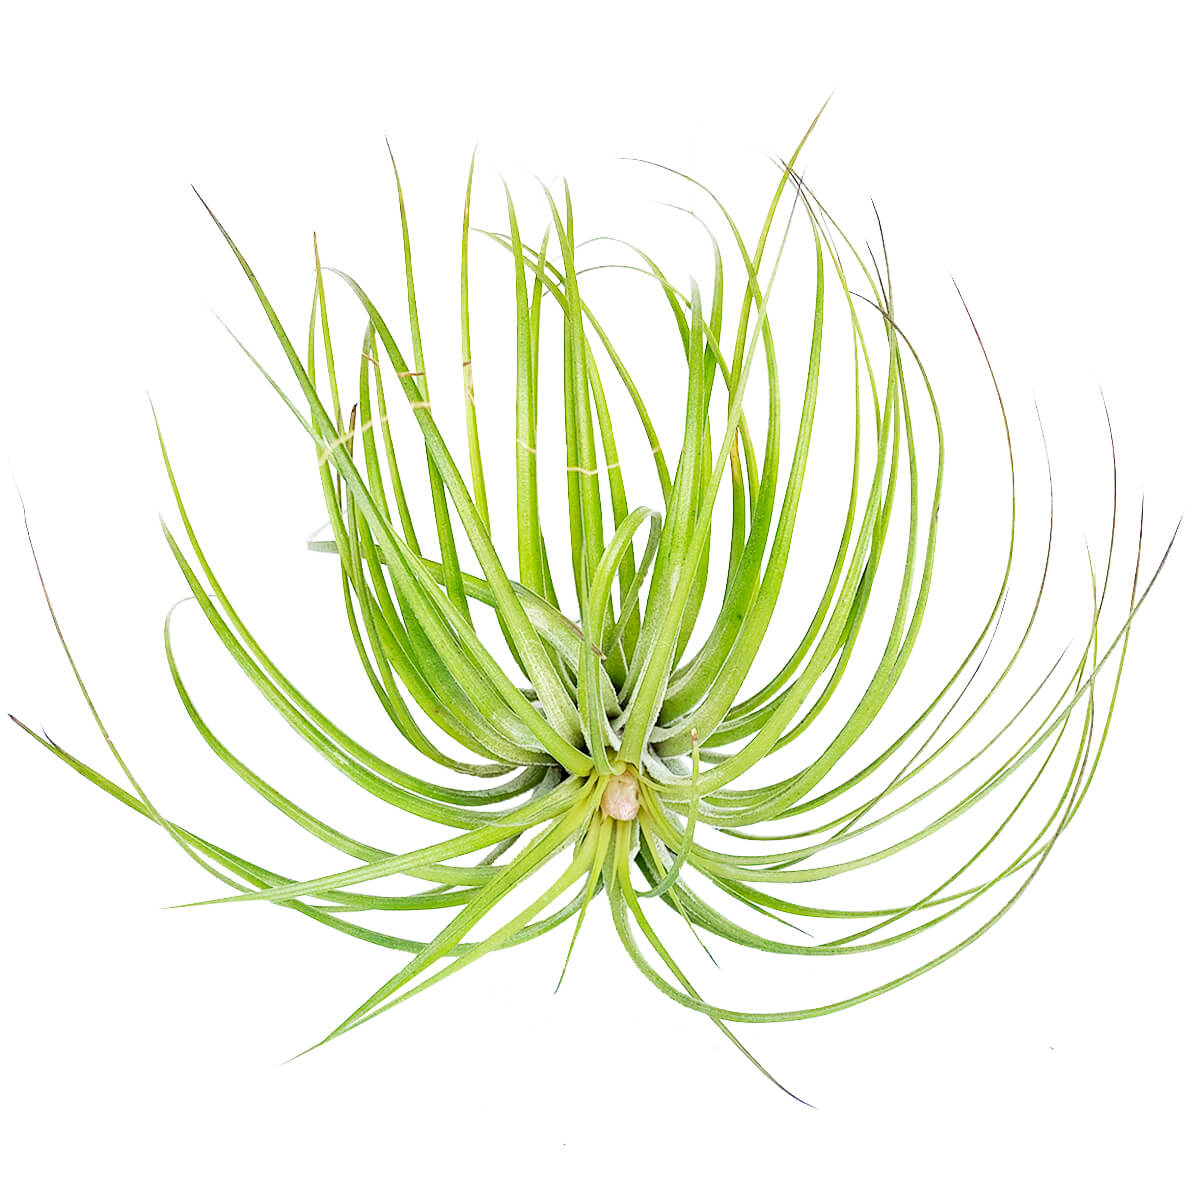 Tillandsia Stricta Green Air Plant for sale, How to grow Stricta Green Air Plant indoor, How to care for Stricta Green Air Plant, Air plants subscription box monthly, Air plants gift ideas, Air plants home office decoration